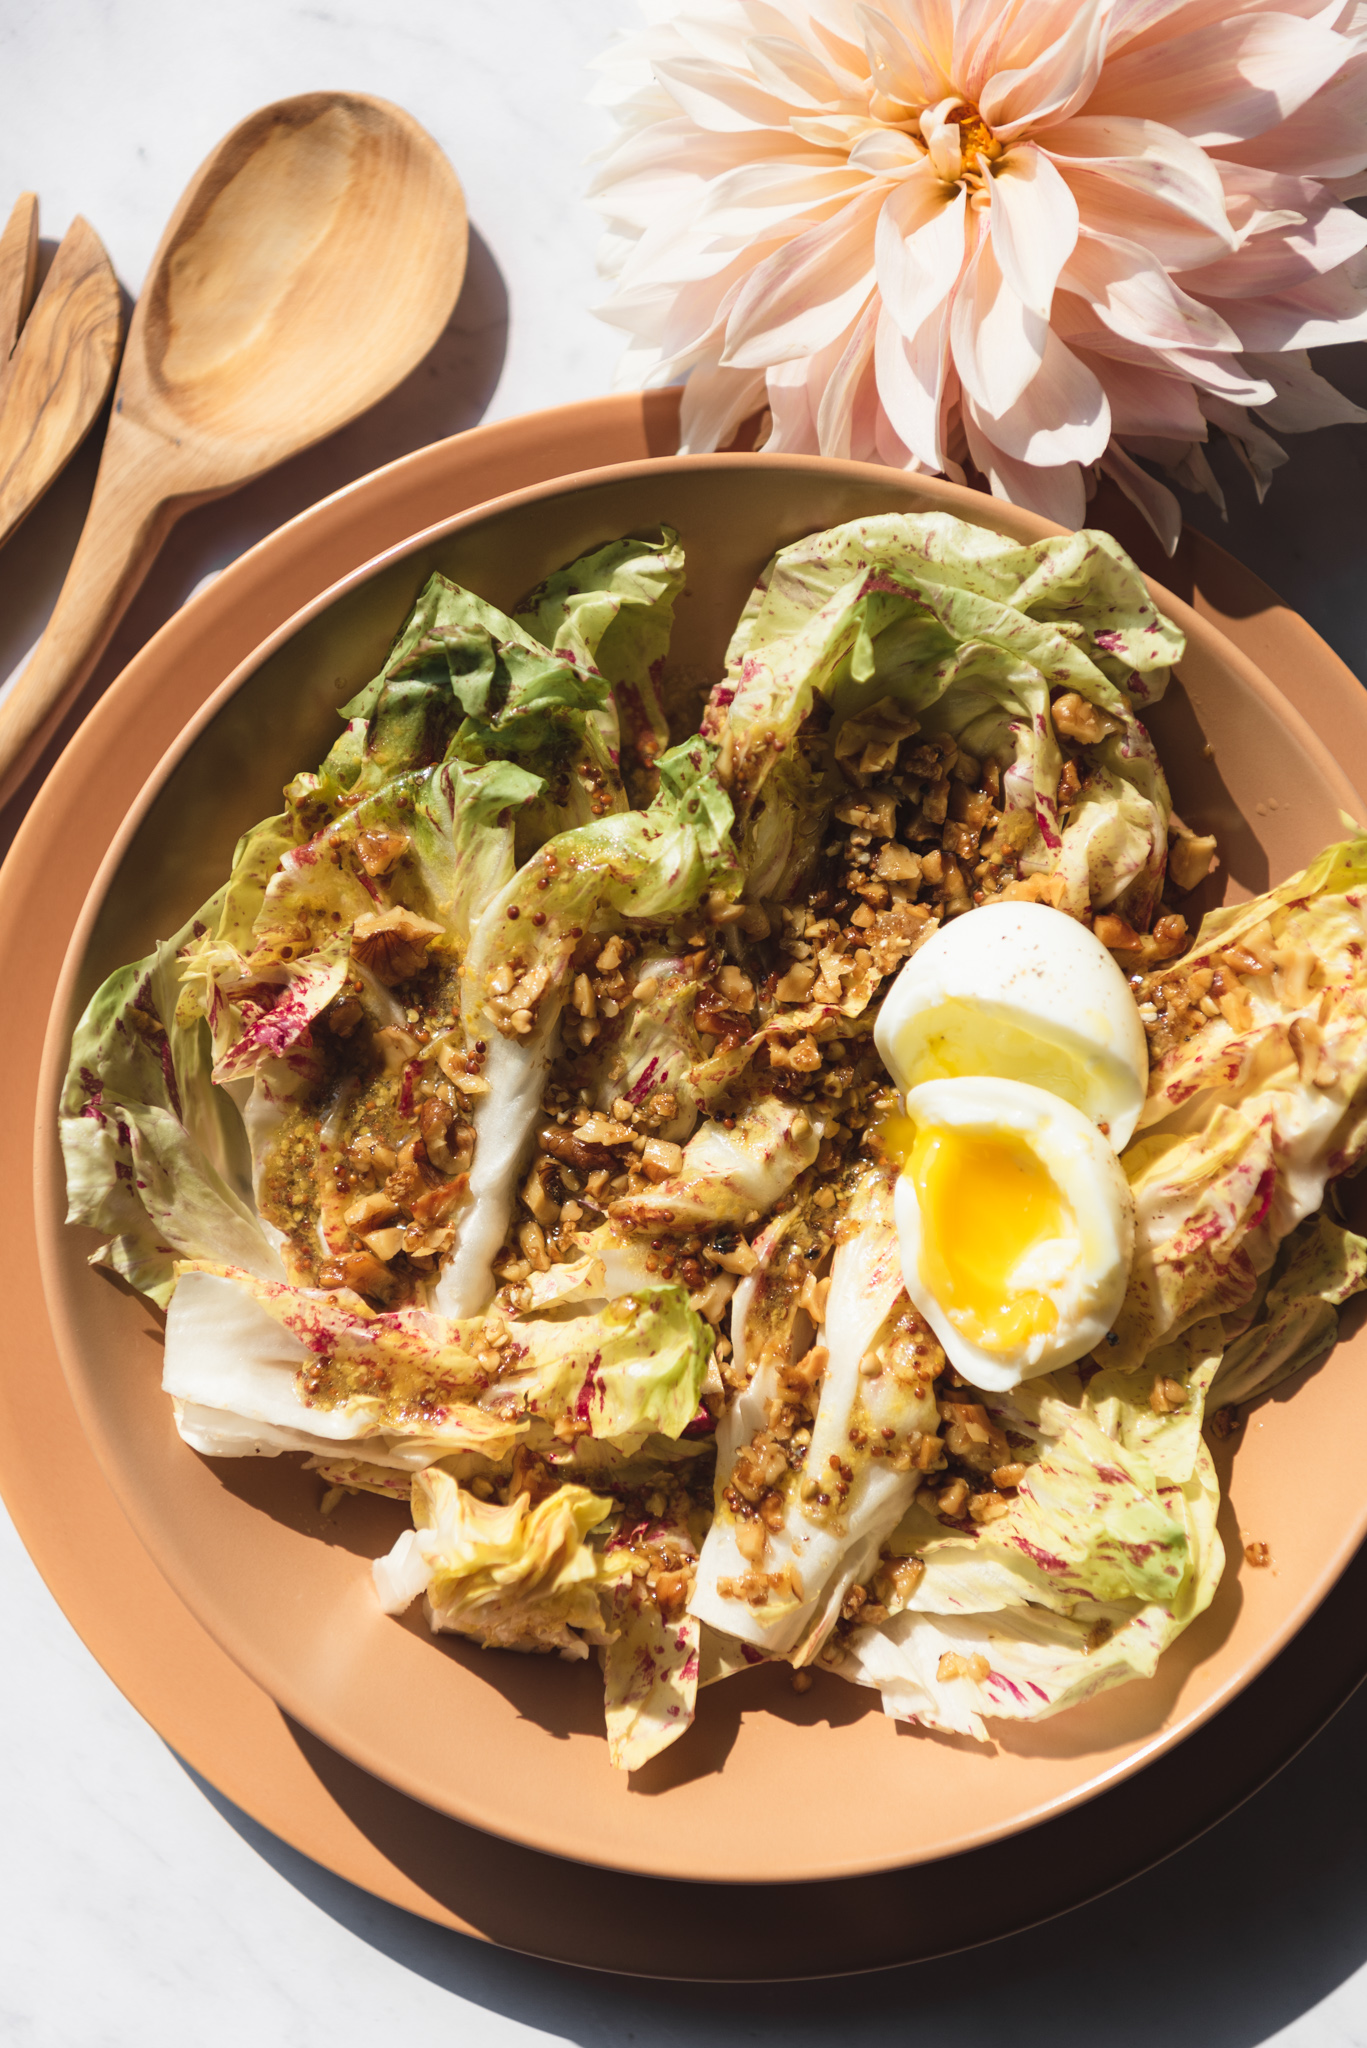 radicchio salad with walnuts and soft boiled egg on terra cotta plate